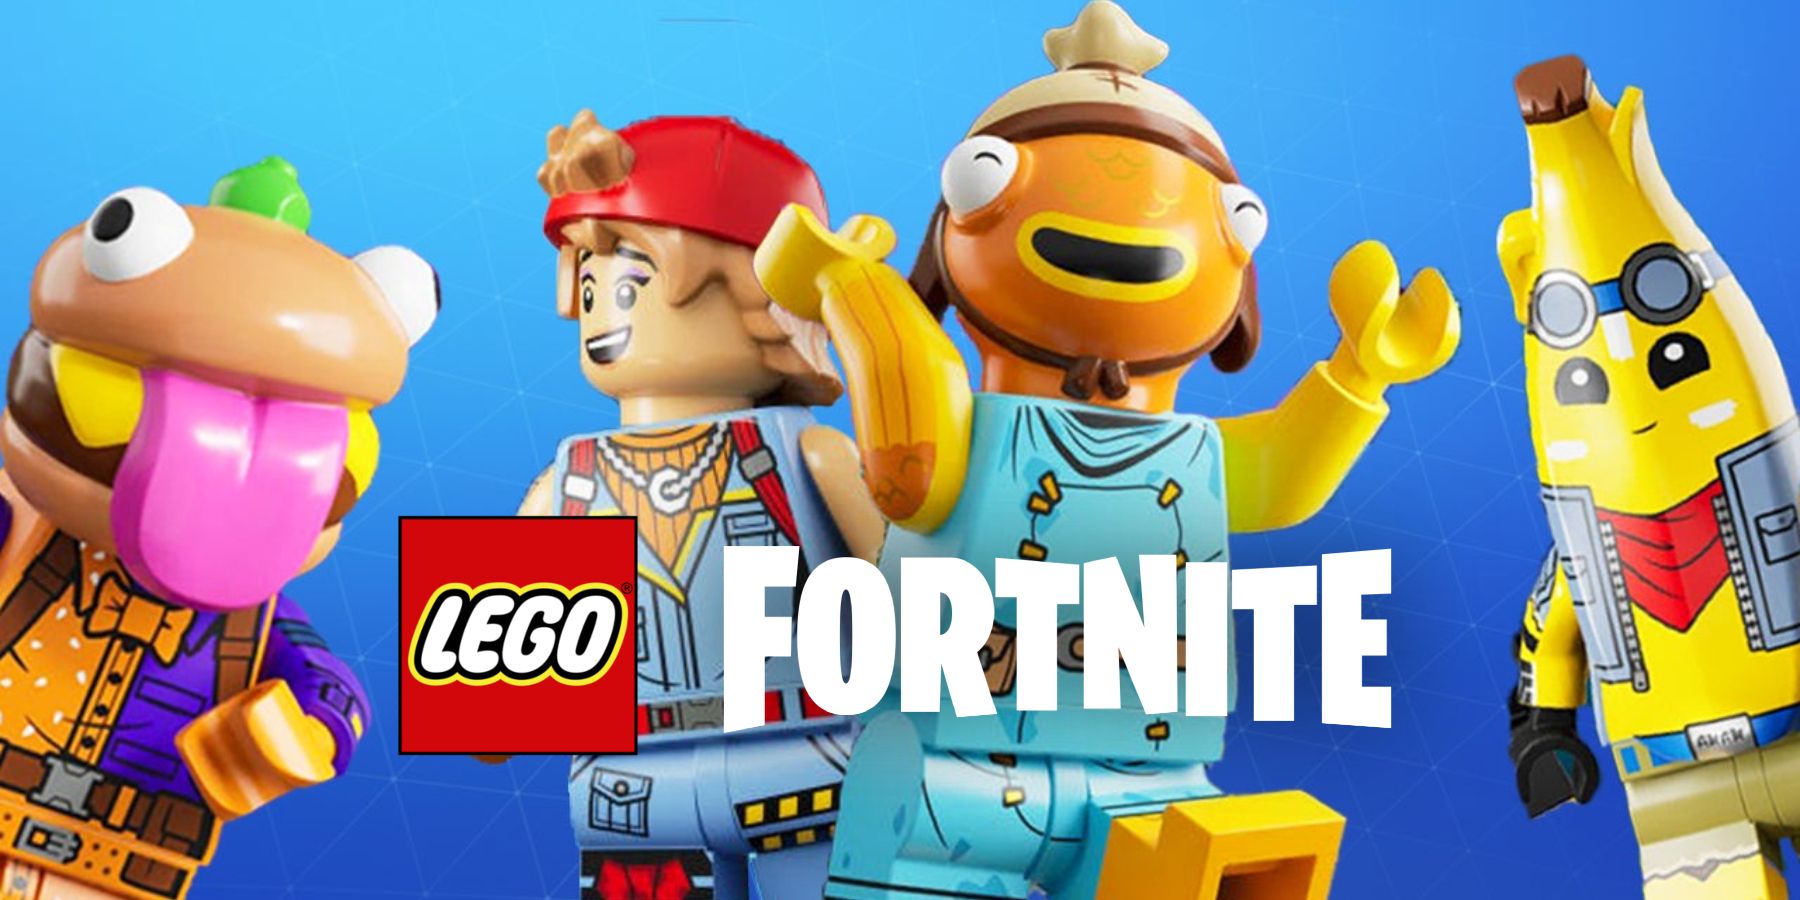 Fortnite Lego Set Is this made to trick people, or am I misunderstanding  the actual product this is selling? : r/Scams